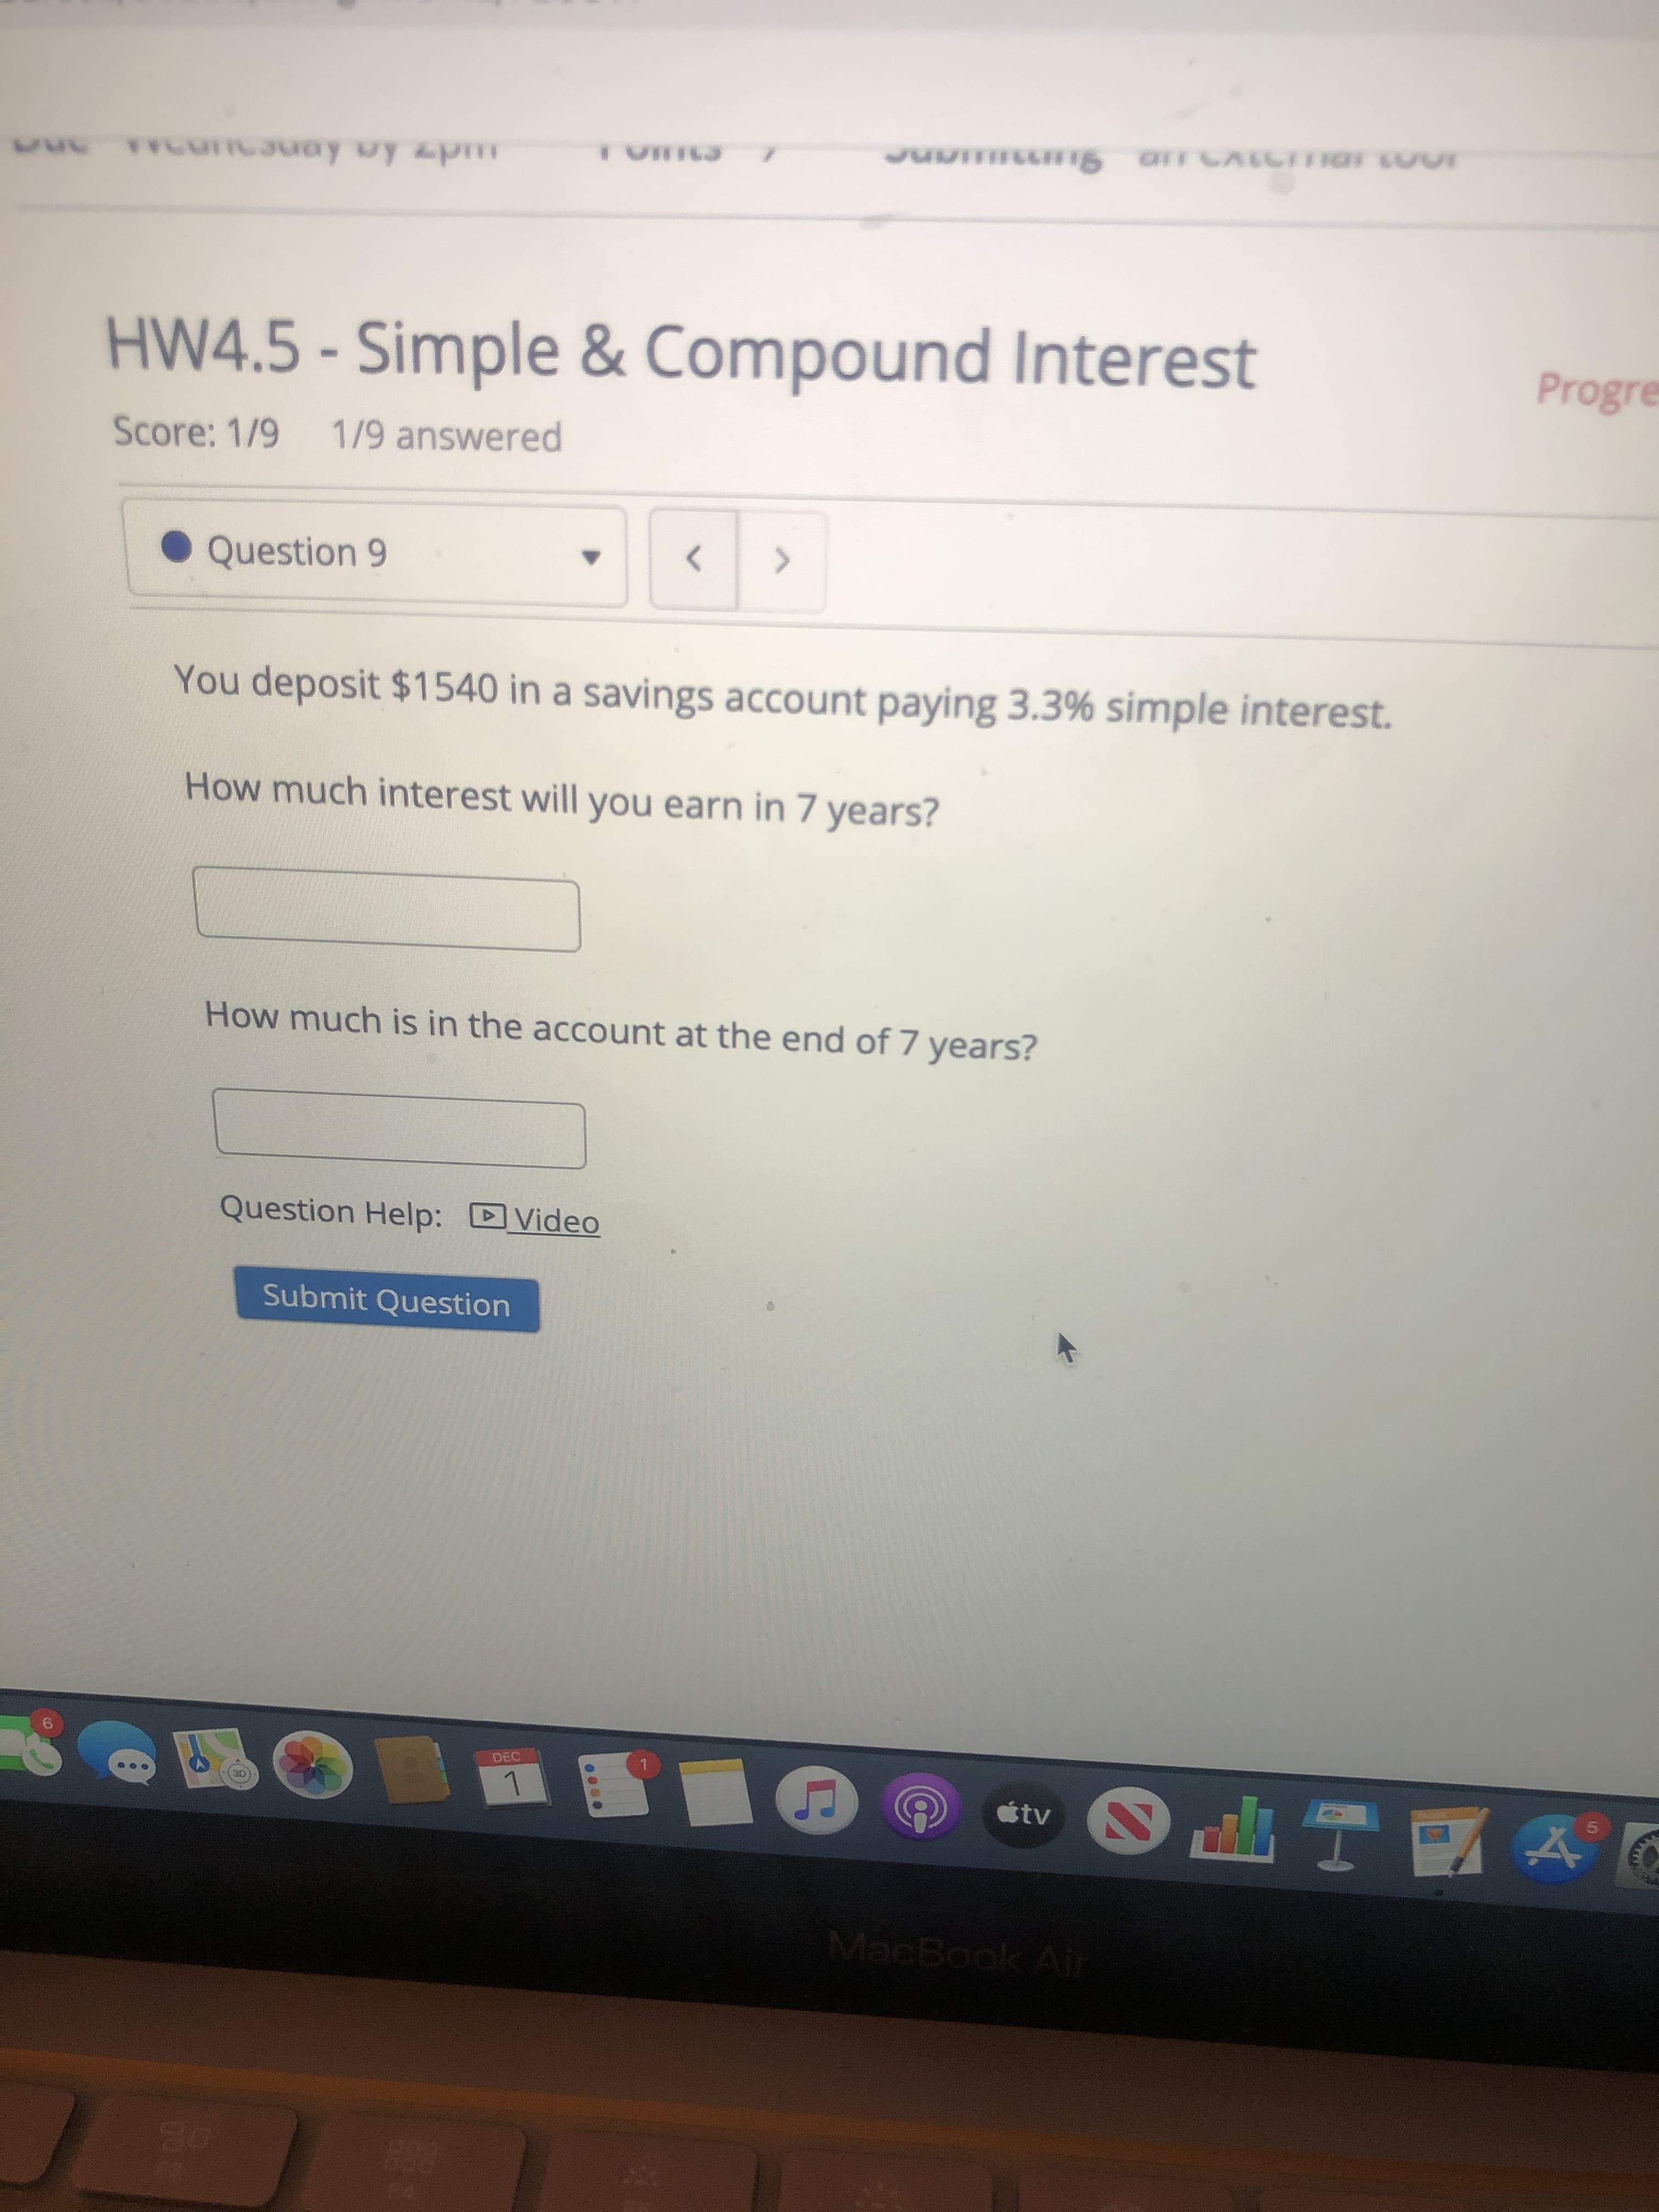 You deposit $1540 in a savings account paying 3.3% simple interest.
How much interest will you earn in 7 years?
How much is in the account at the end of 7 years?
